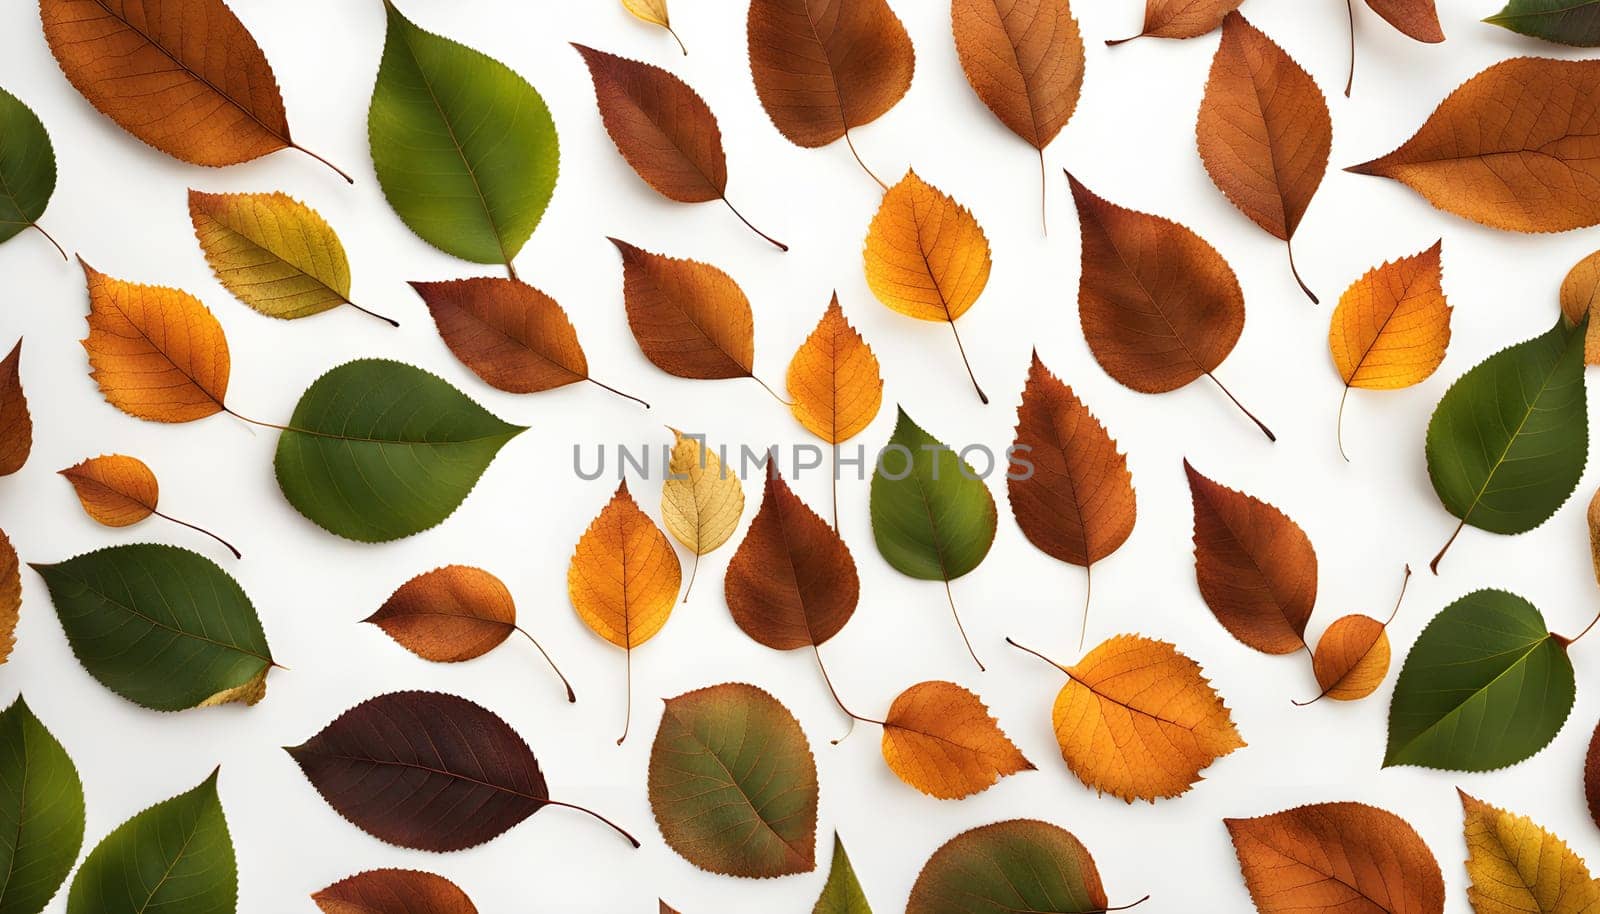 pattern of leaves lying on the ground, high close-up of leaves scattered on a white background Generate AI